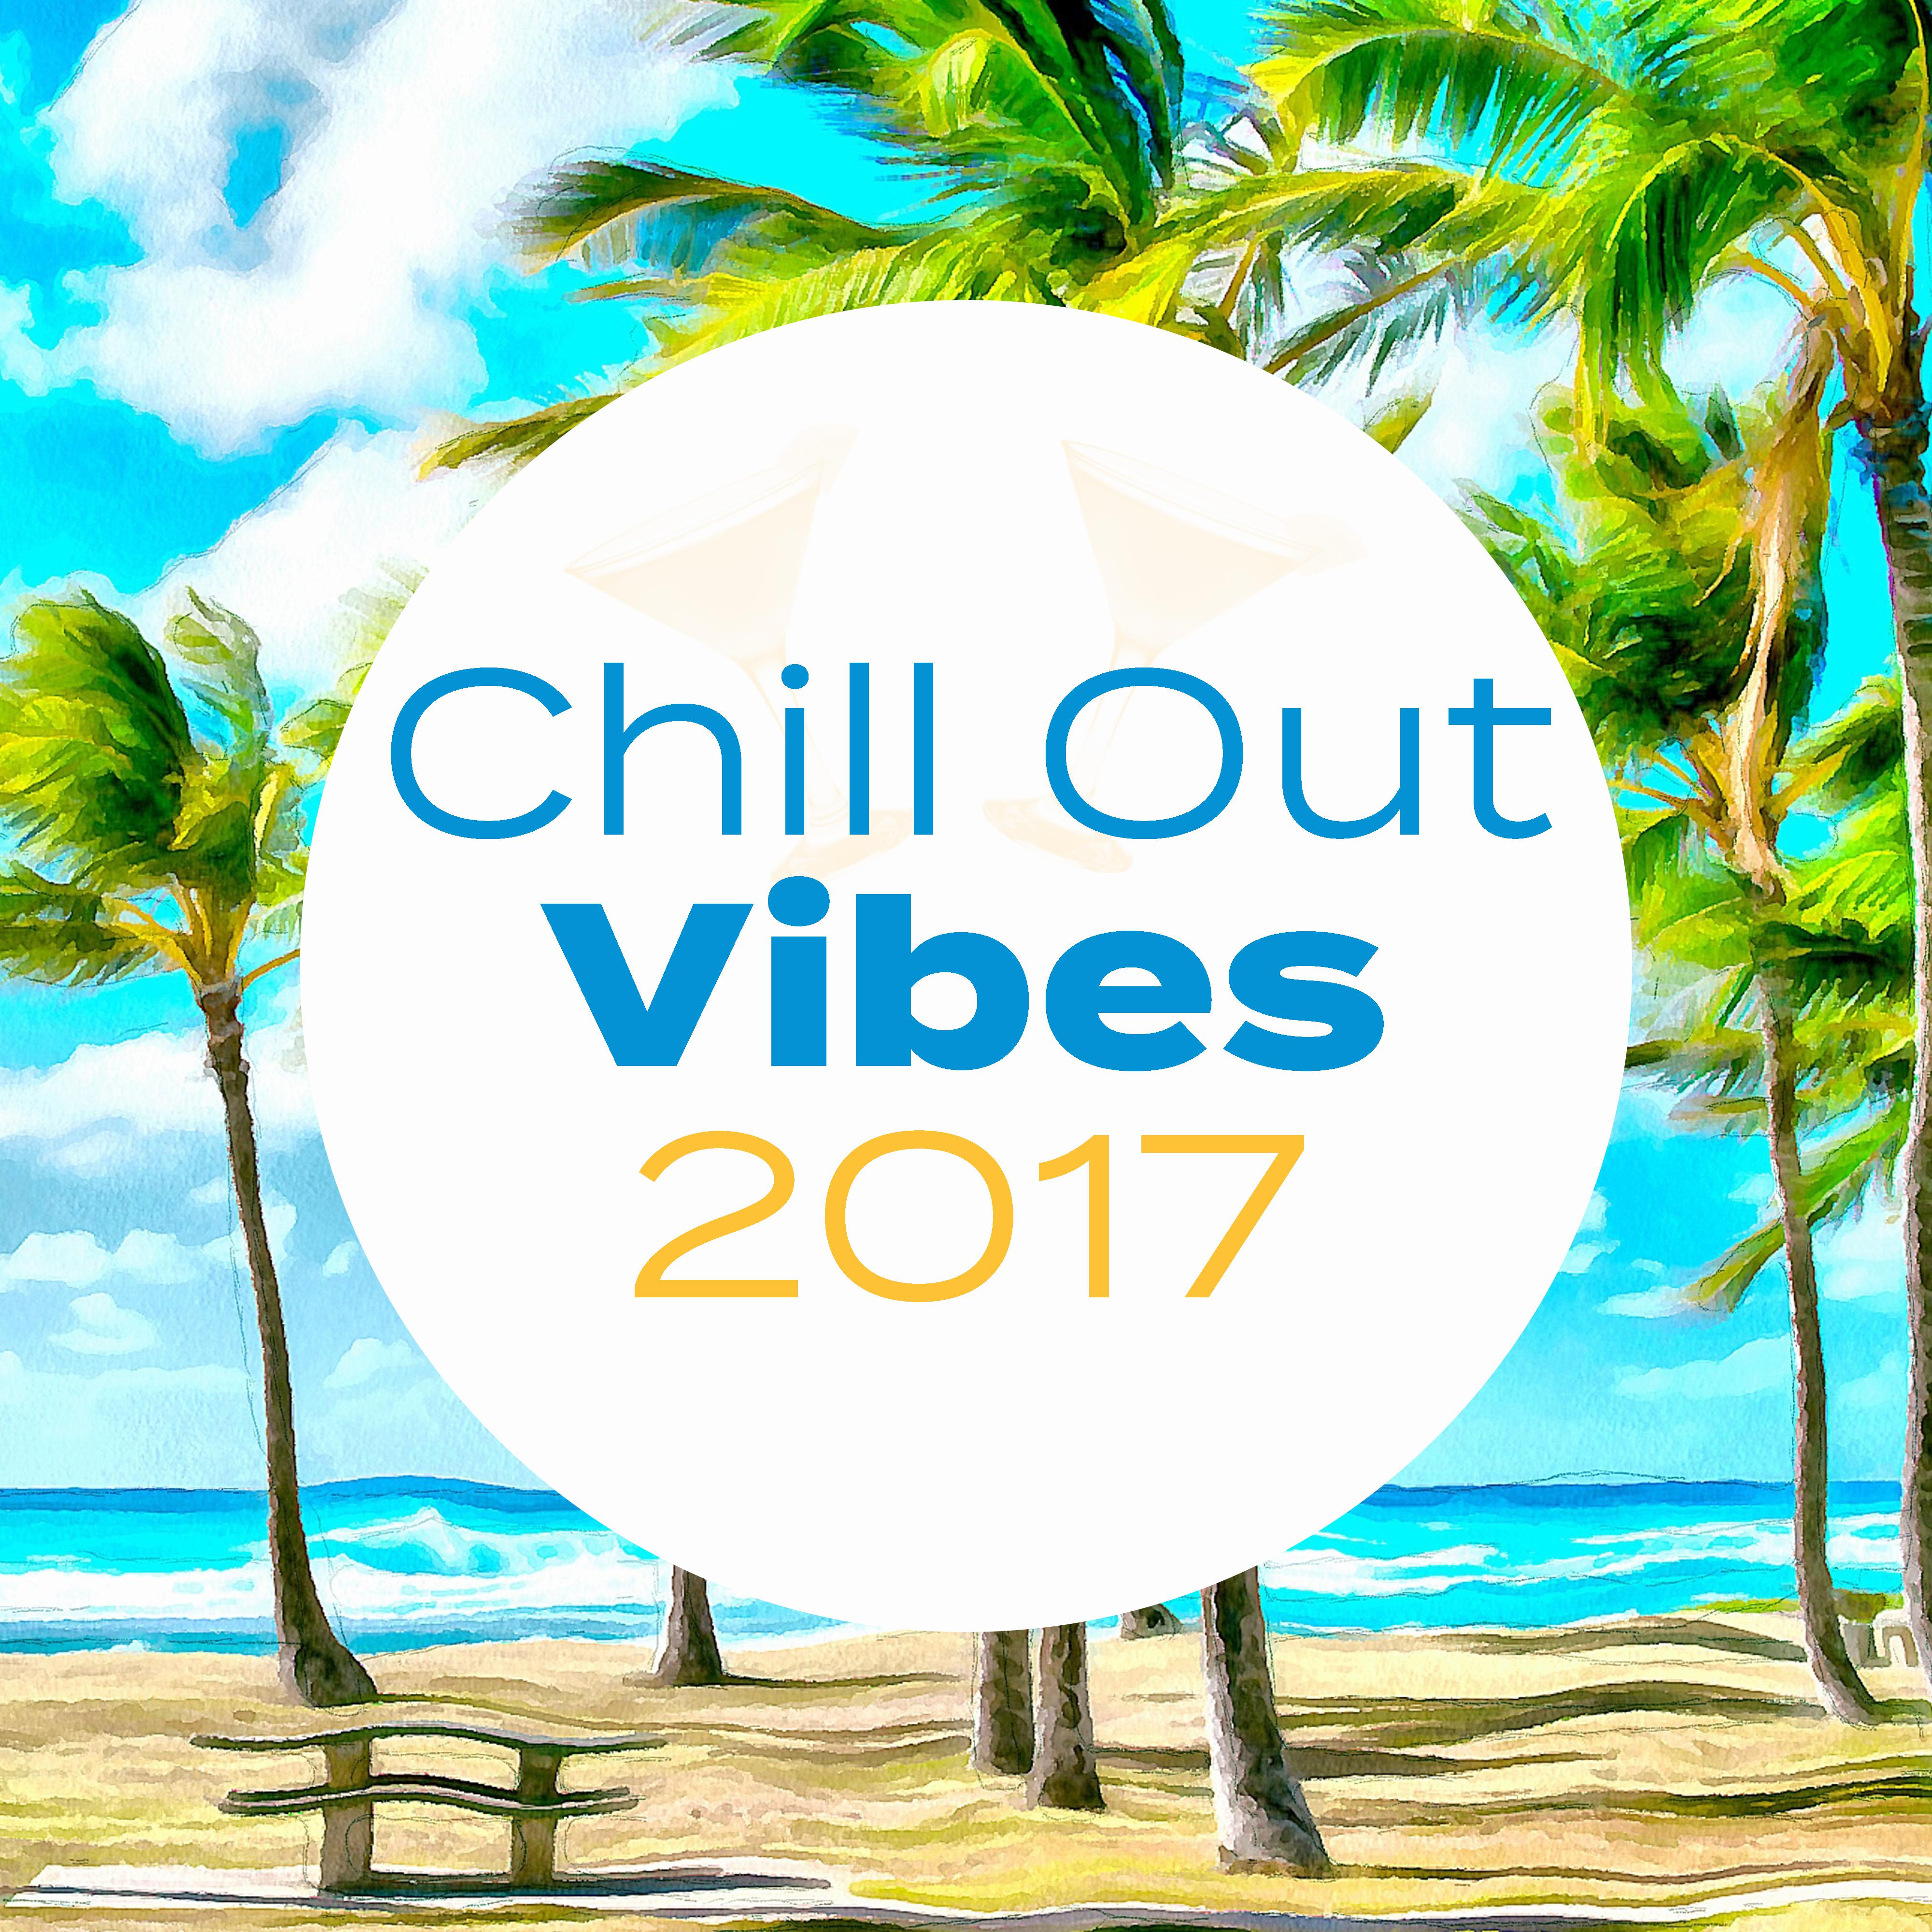 Chill Out Vibes 2017  Summer Hits, Rest on the Beach, Tropical Sun, Holiday Relaxation